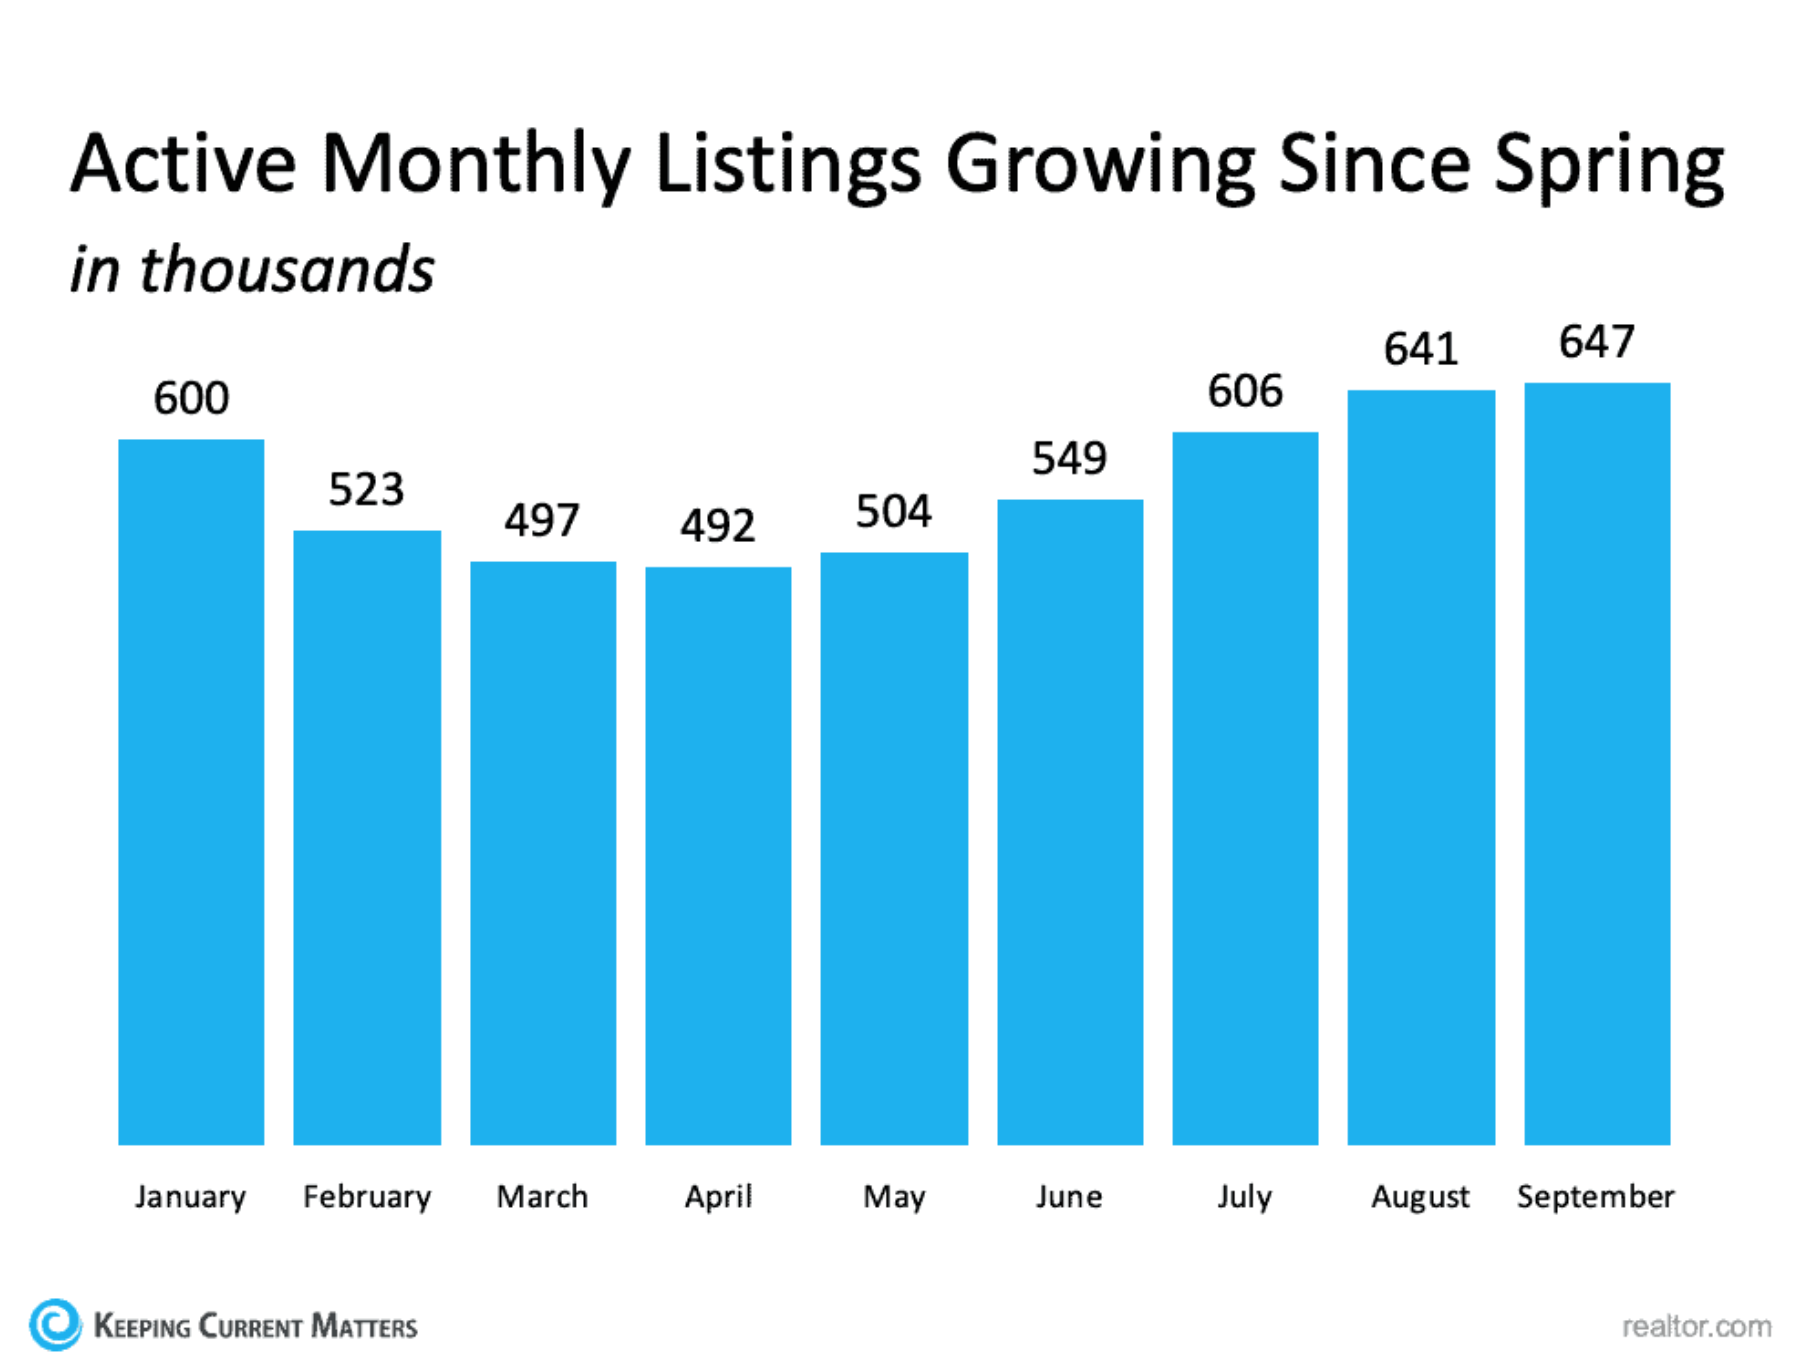 Active monthly listings growing since spring